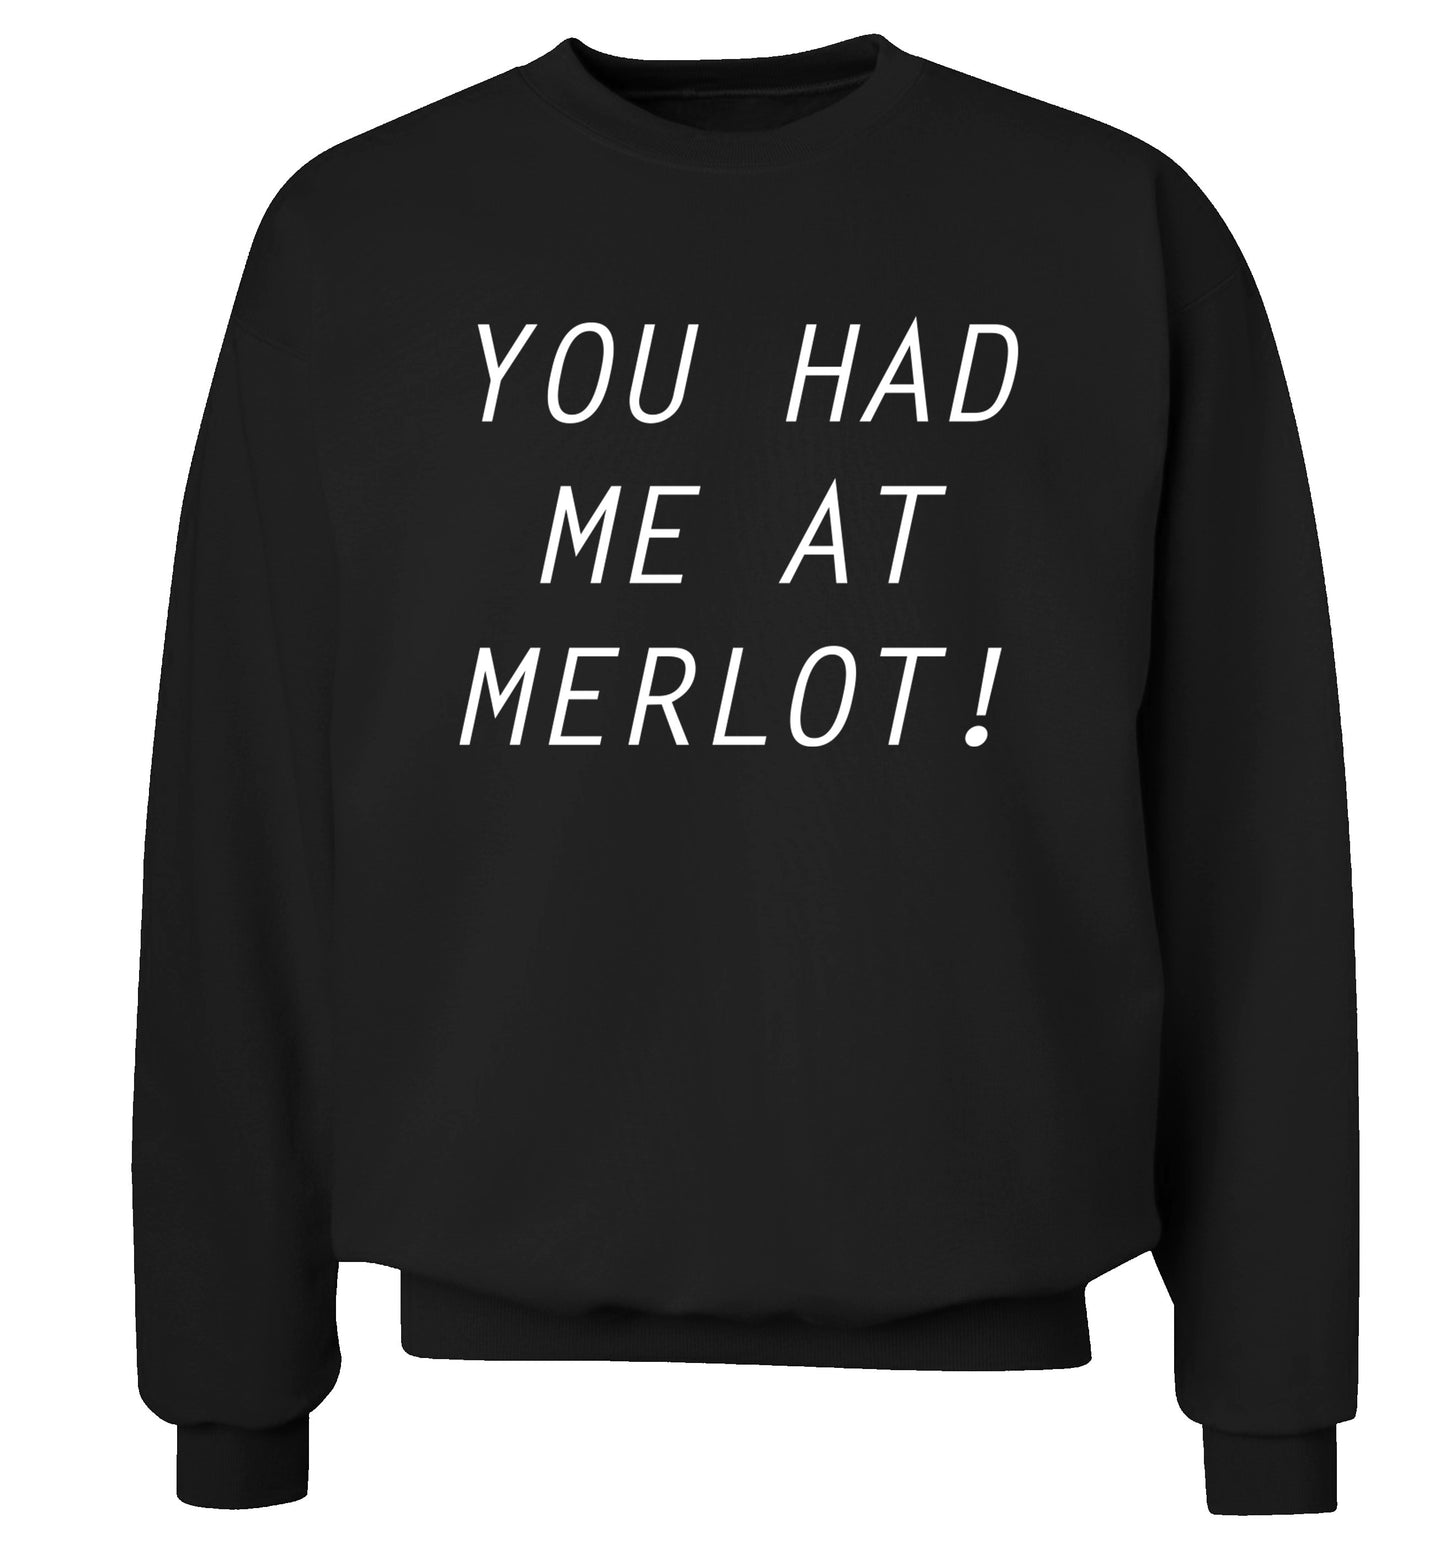 You had me at merlot Adult's unisex black Sweater 2XL